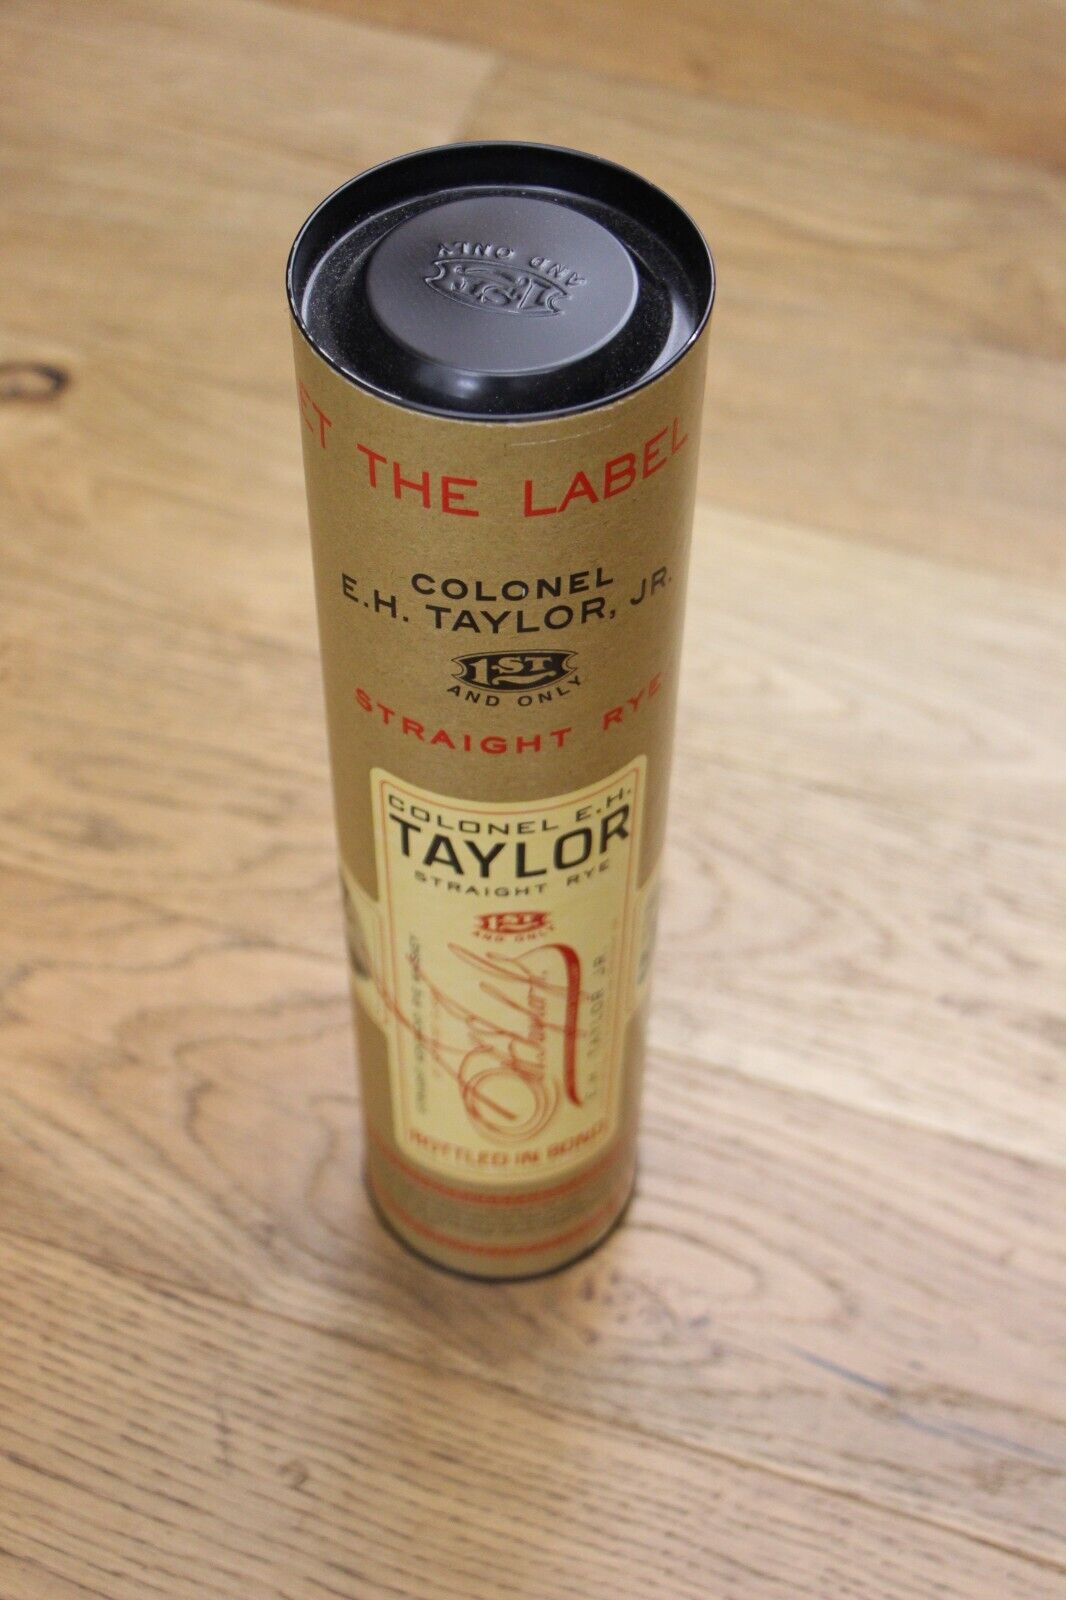 Colonel EH Taylor Straight  Rye  bottled in Bond EMPTY TUBE ONLY - NO BOTTLE